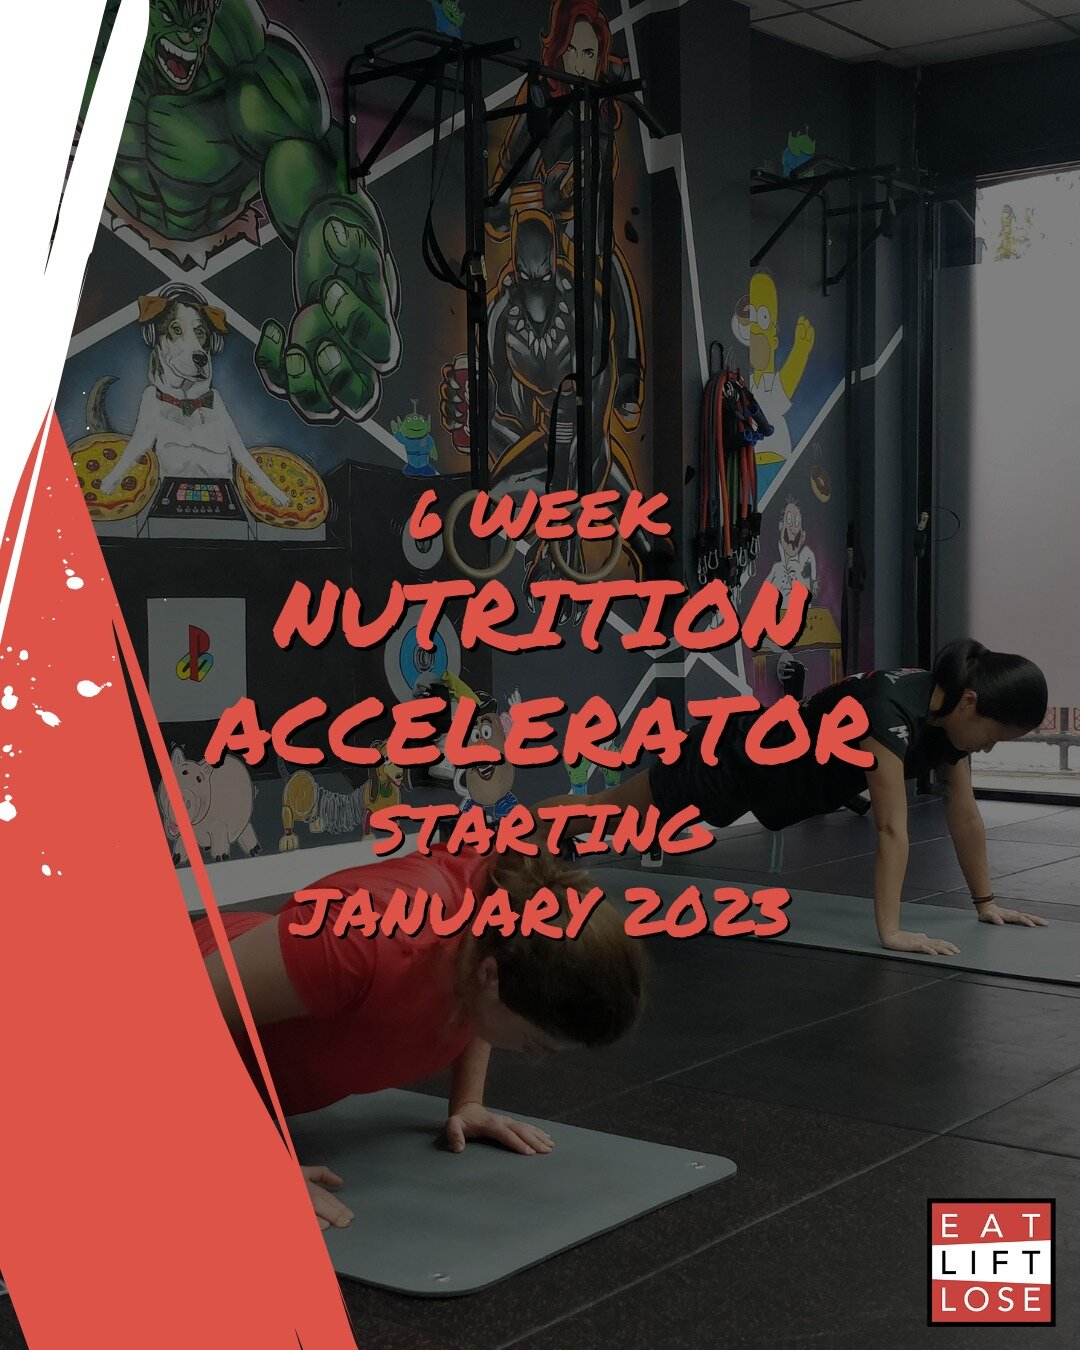 🎯Ready to accelerate your progress and get 2023 off to a bang?🎯

In January, we'll be launching for the very first time our Nutrition Accelerator.

Available to members of the gym only, you'll get all the extra support and individual accountability